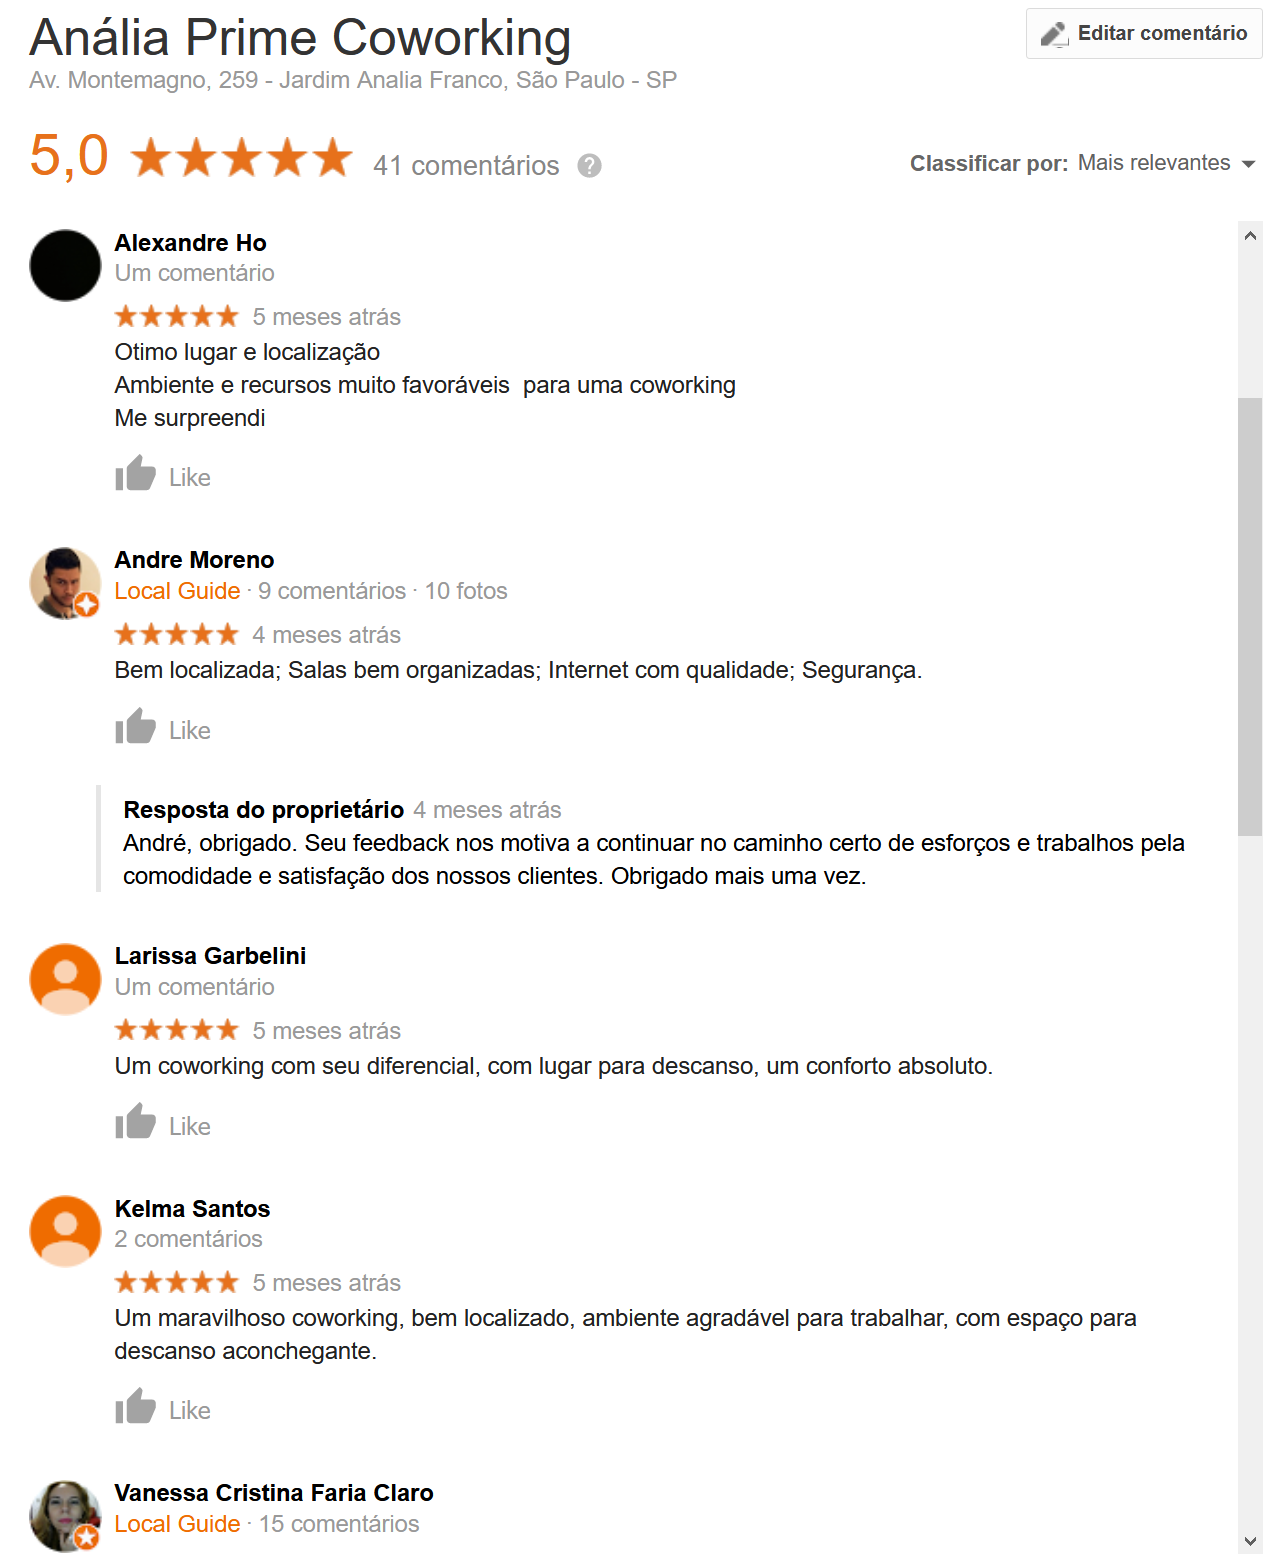 analiaprimecoworking-clientes